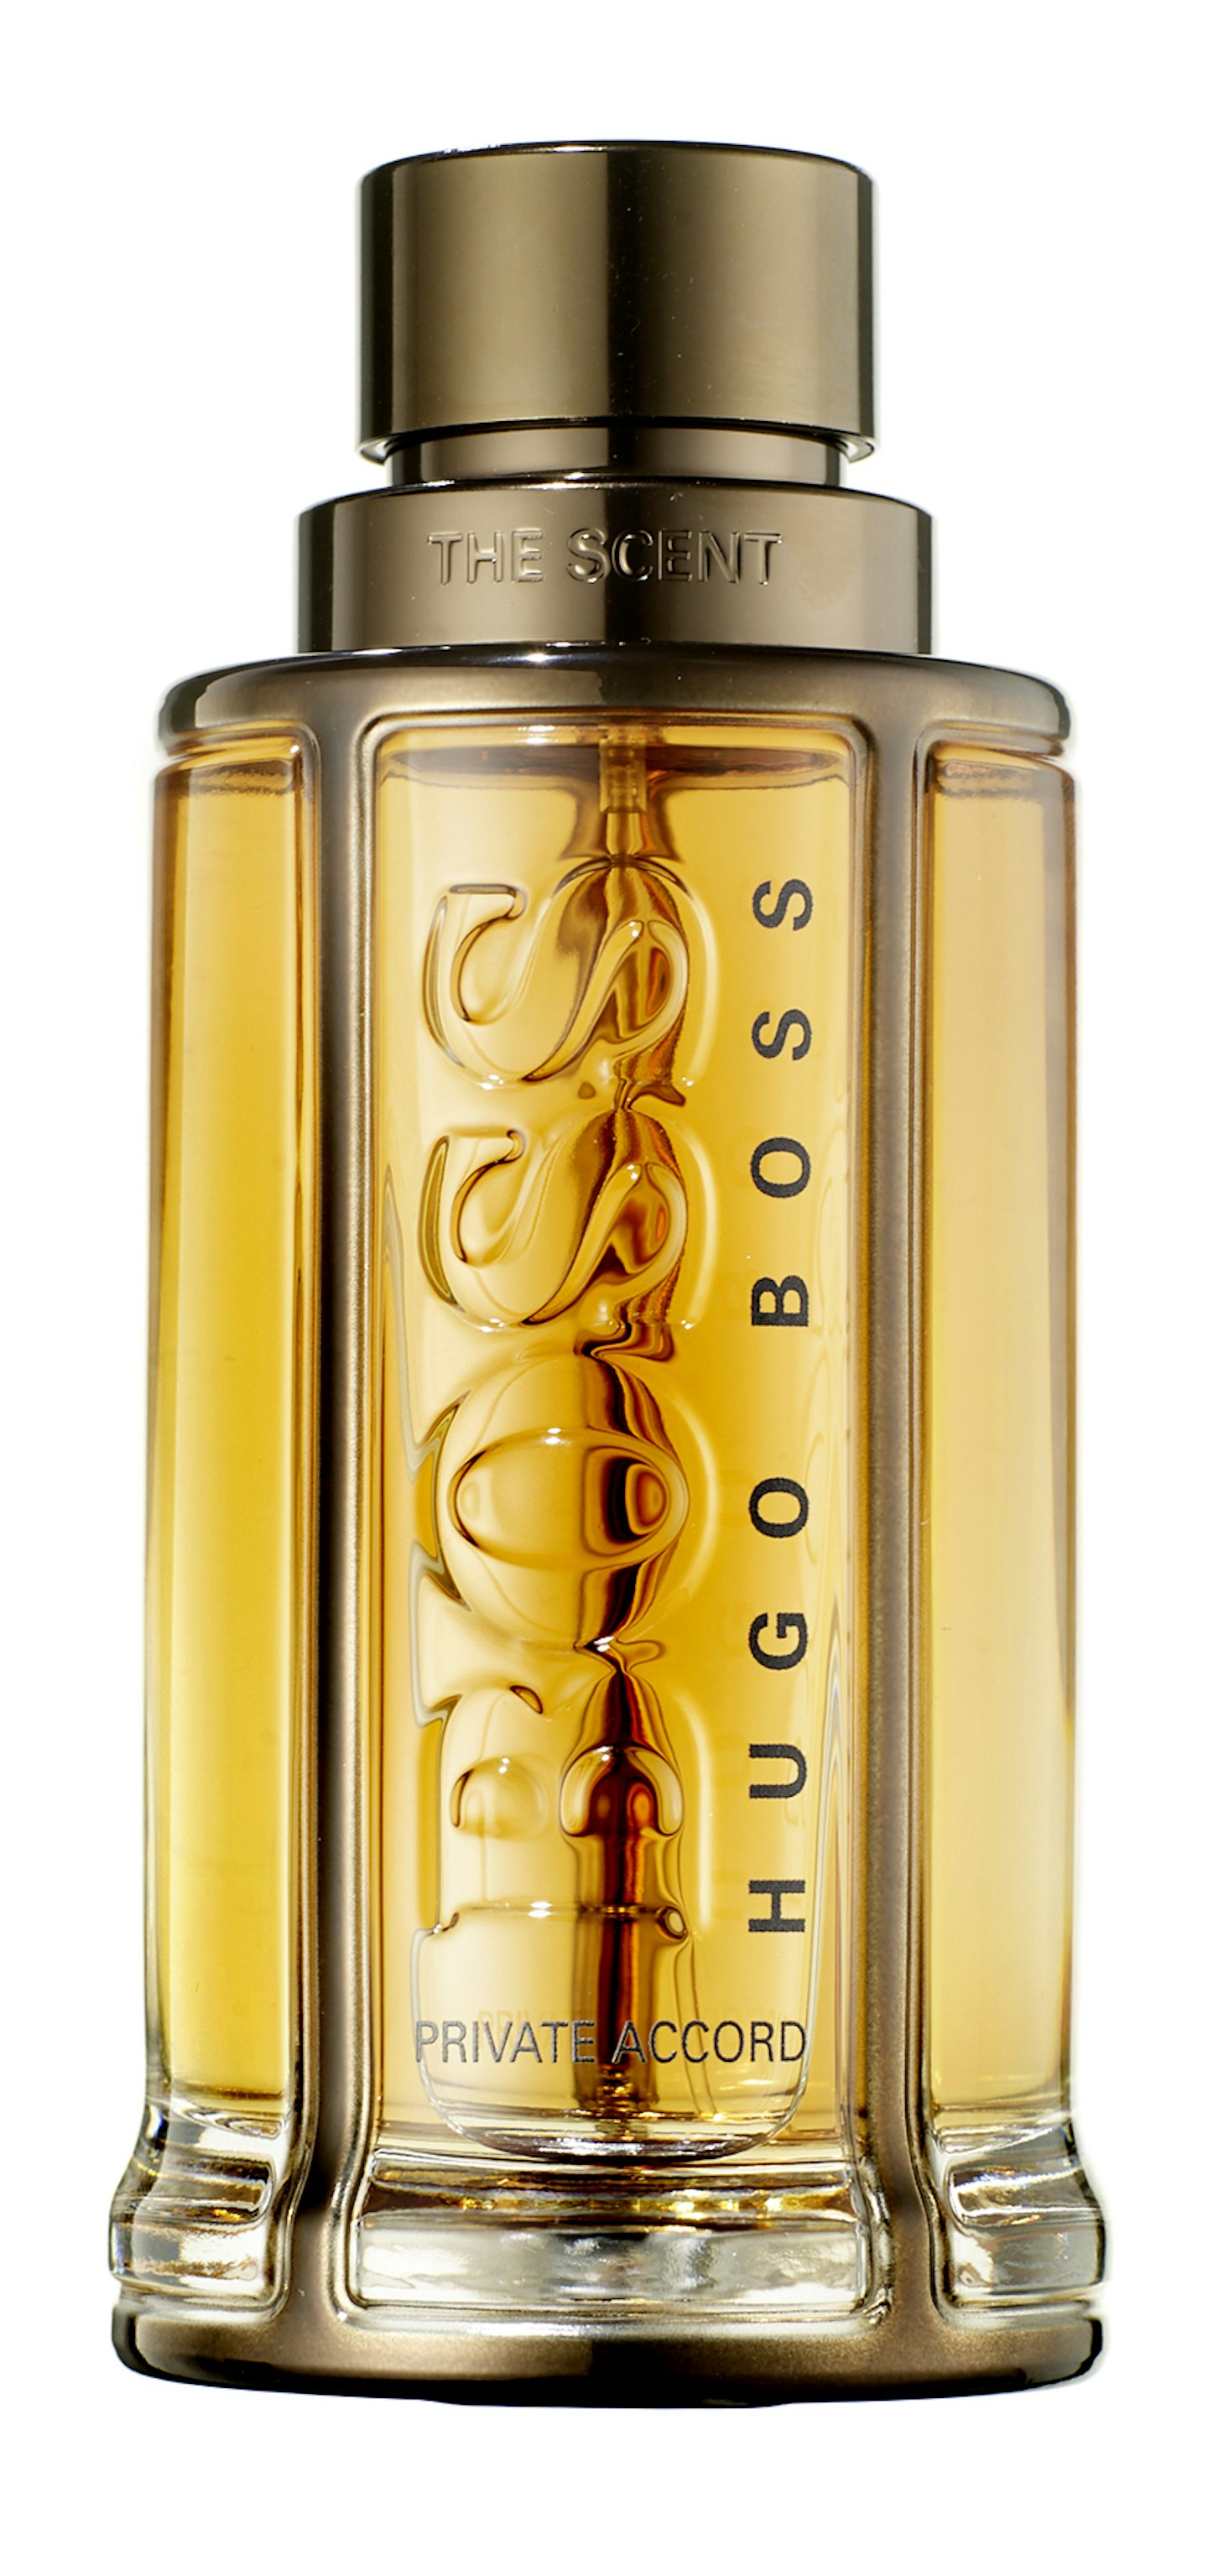 Hugo Boss The Scent Private Accord For Him EDP, £69 for 100ml